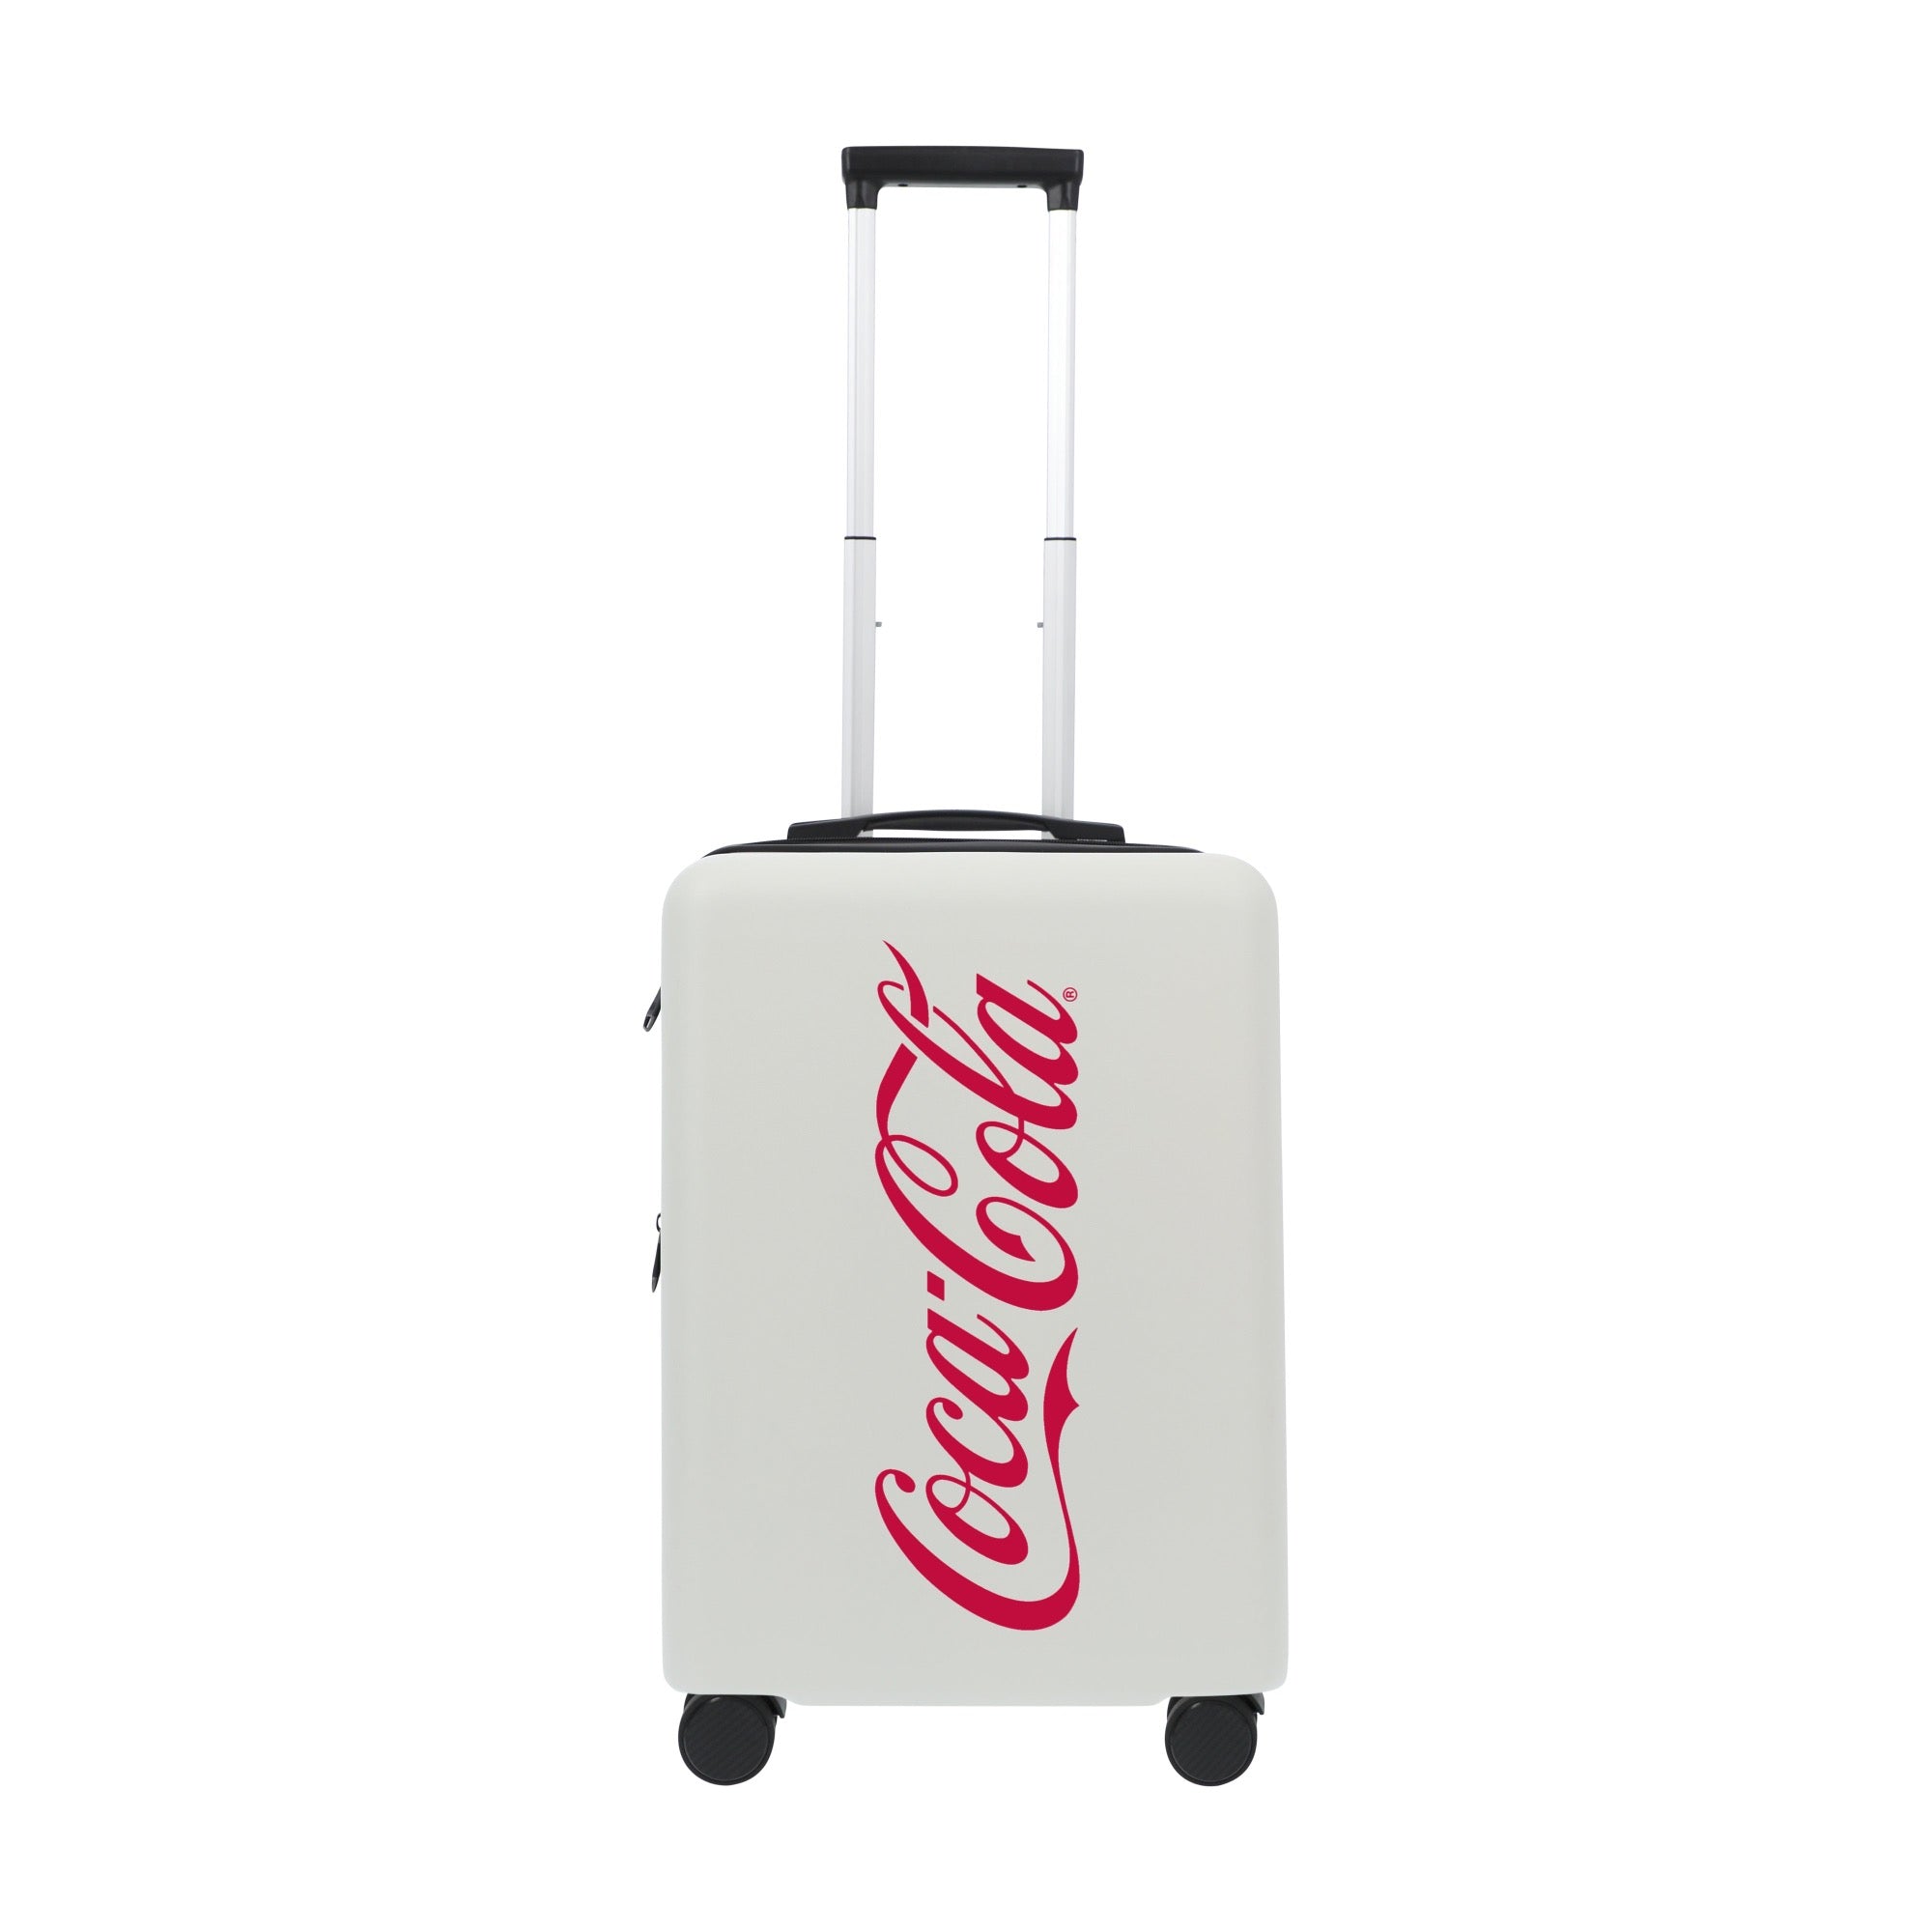 White coca cola 22.5" carry-on spinner suitcase luggage by Ful